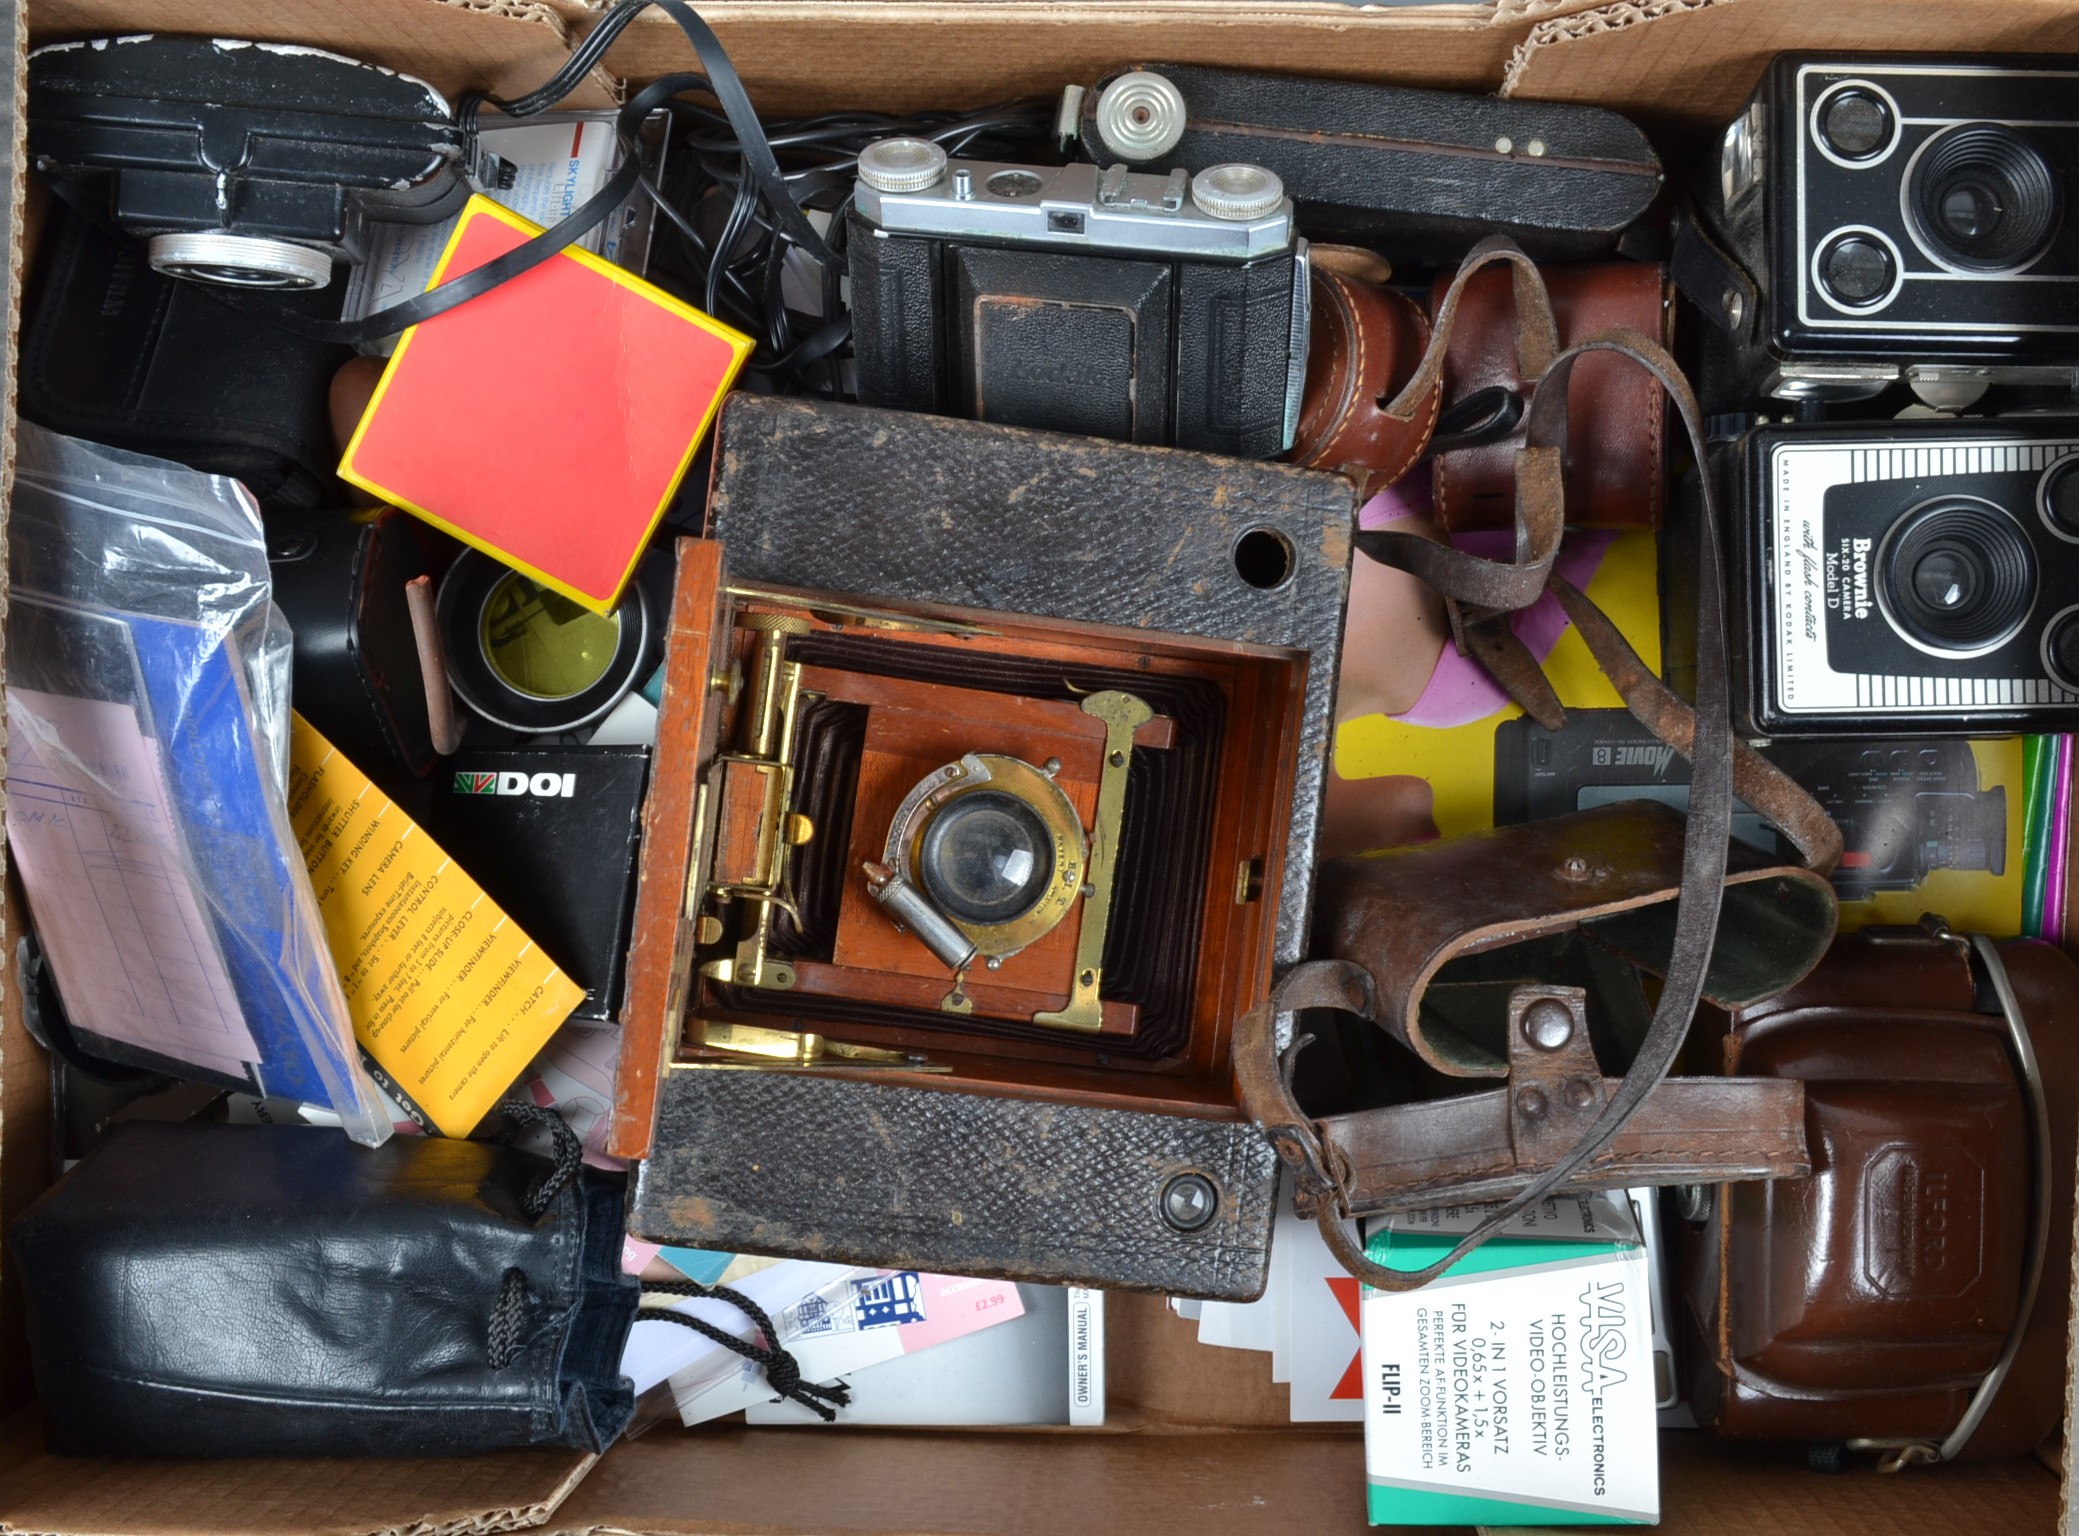 Various Cameras and Other Items, including a No 4 Cartridge Kodak, AF, two box Brownies, Kodak